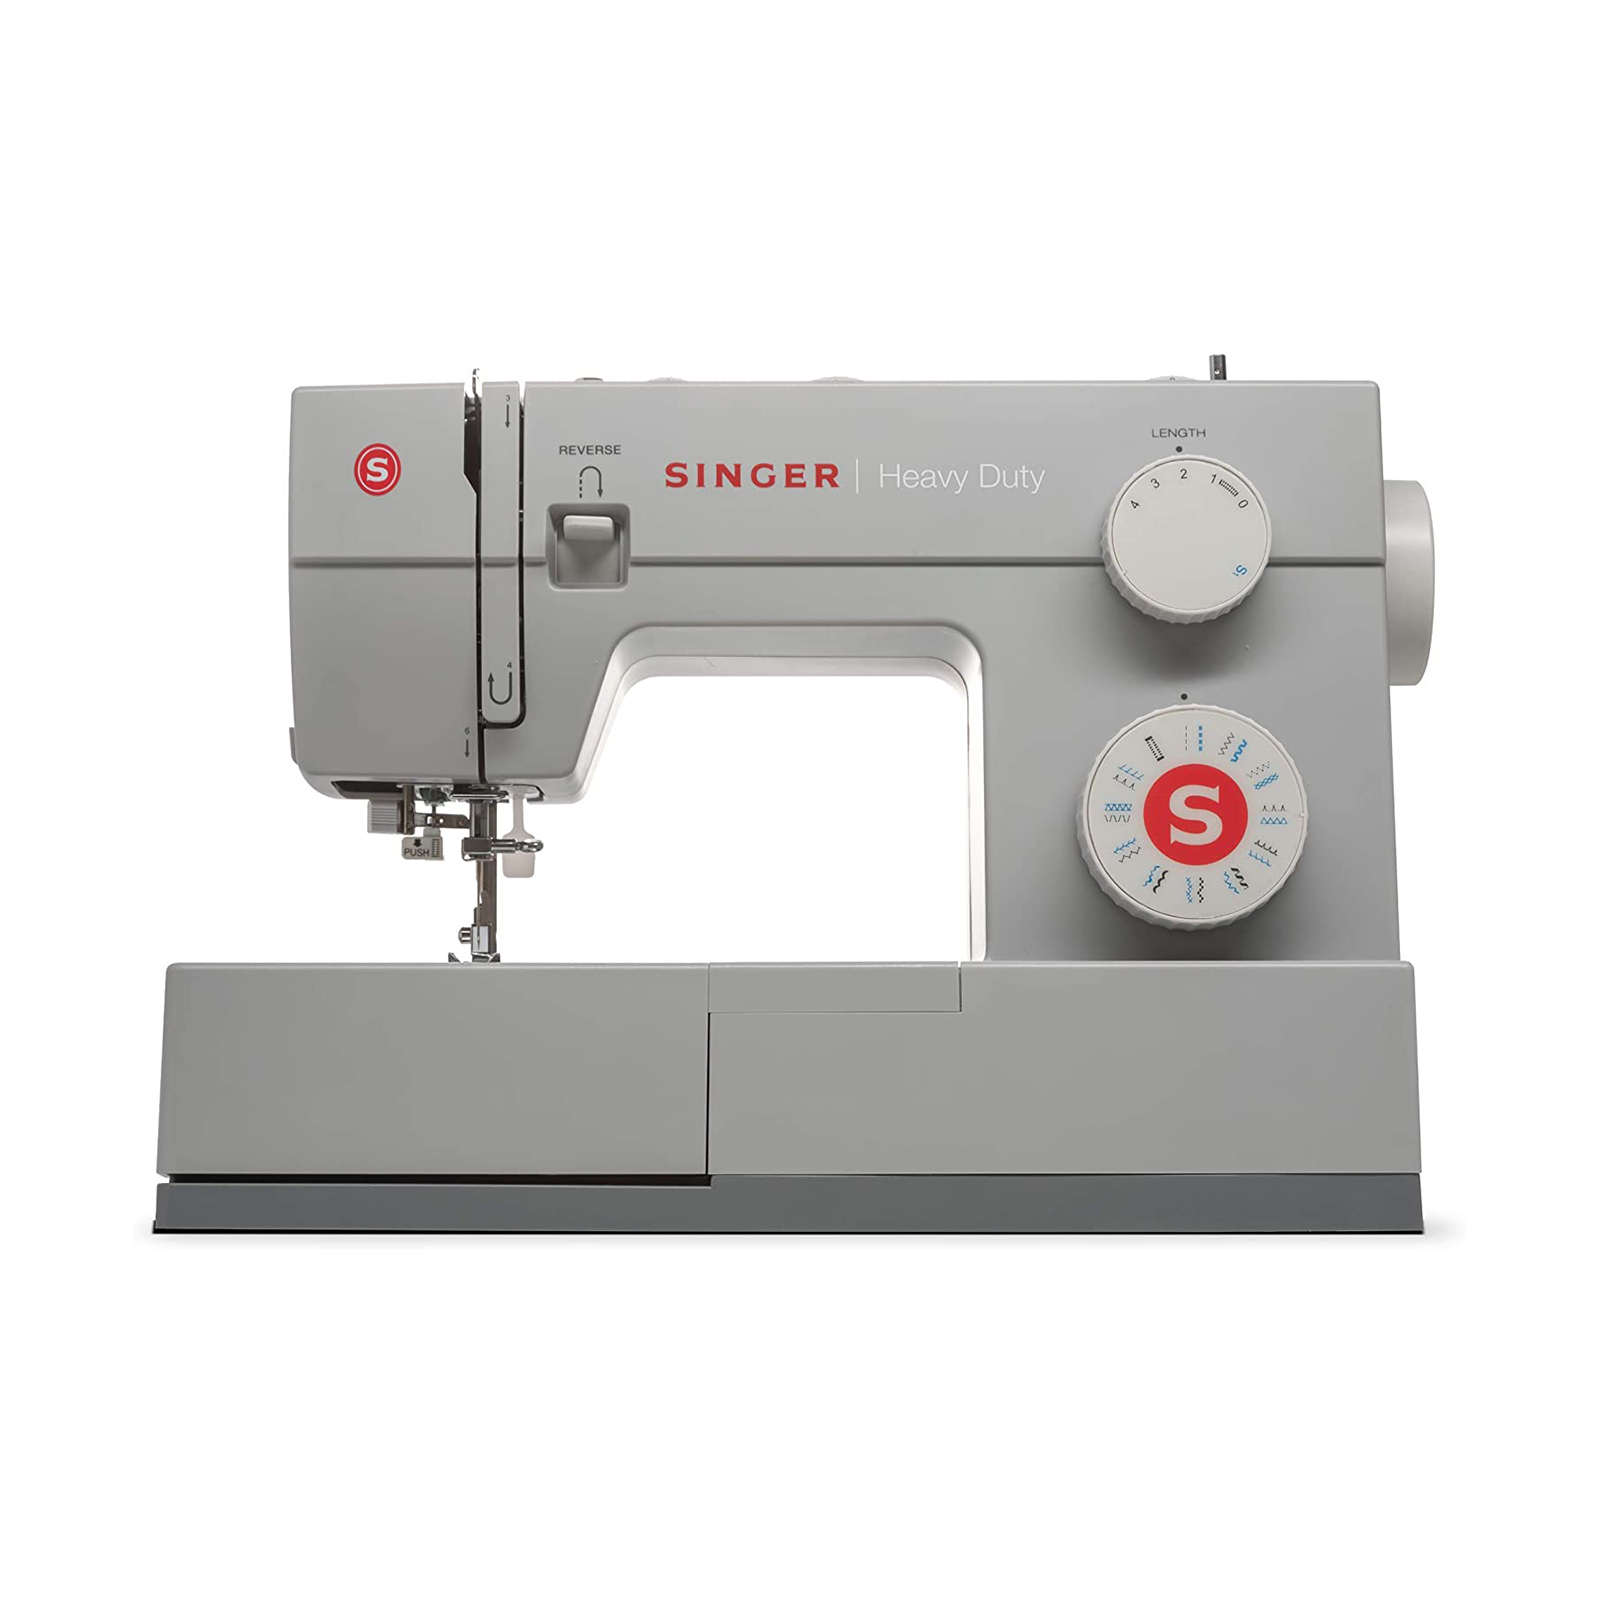 Brother GX37 Computerized Sewing Machine for sale online